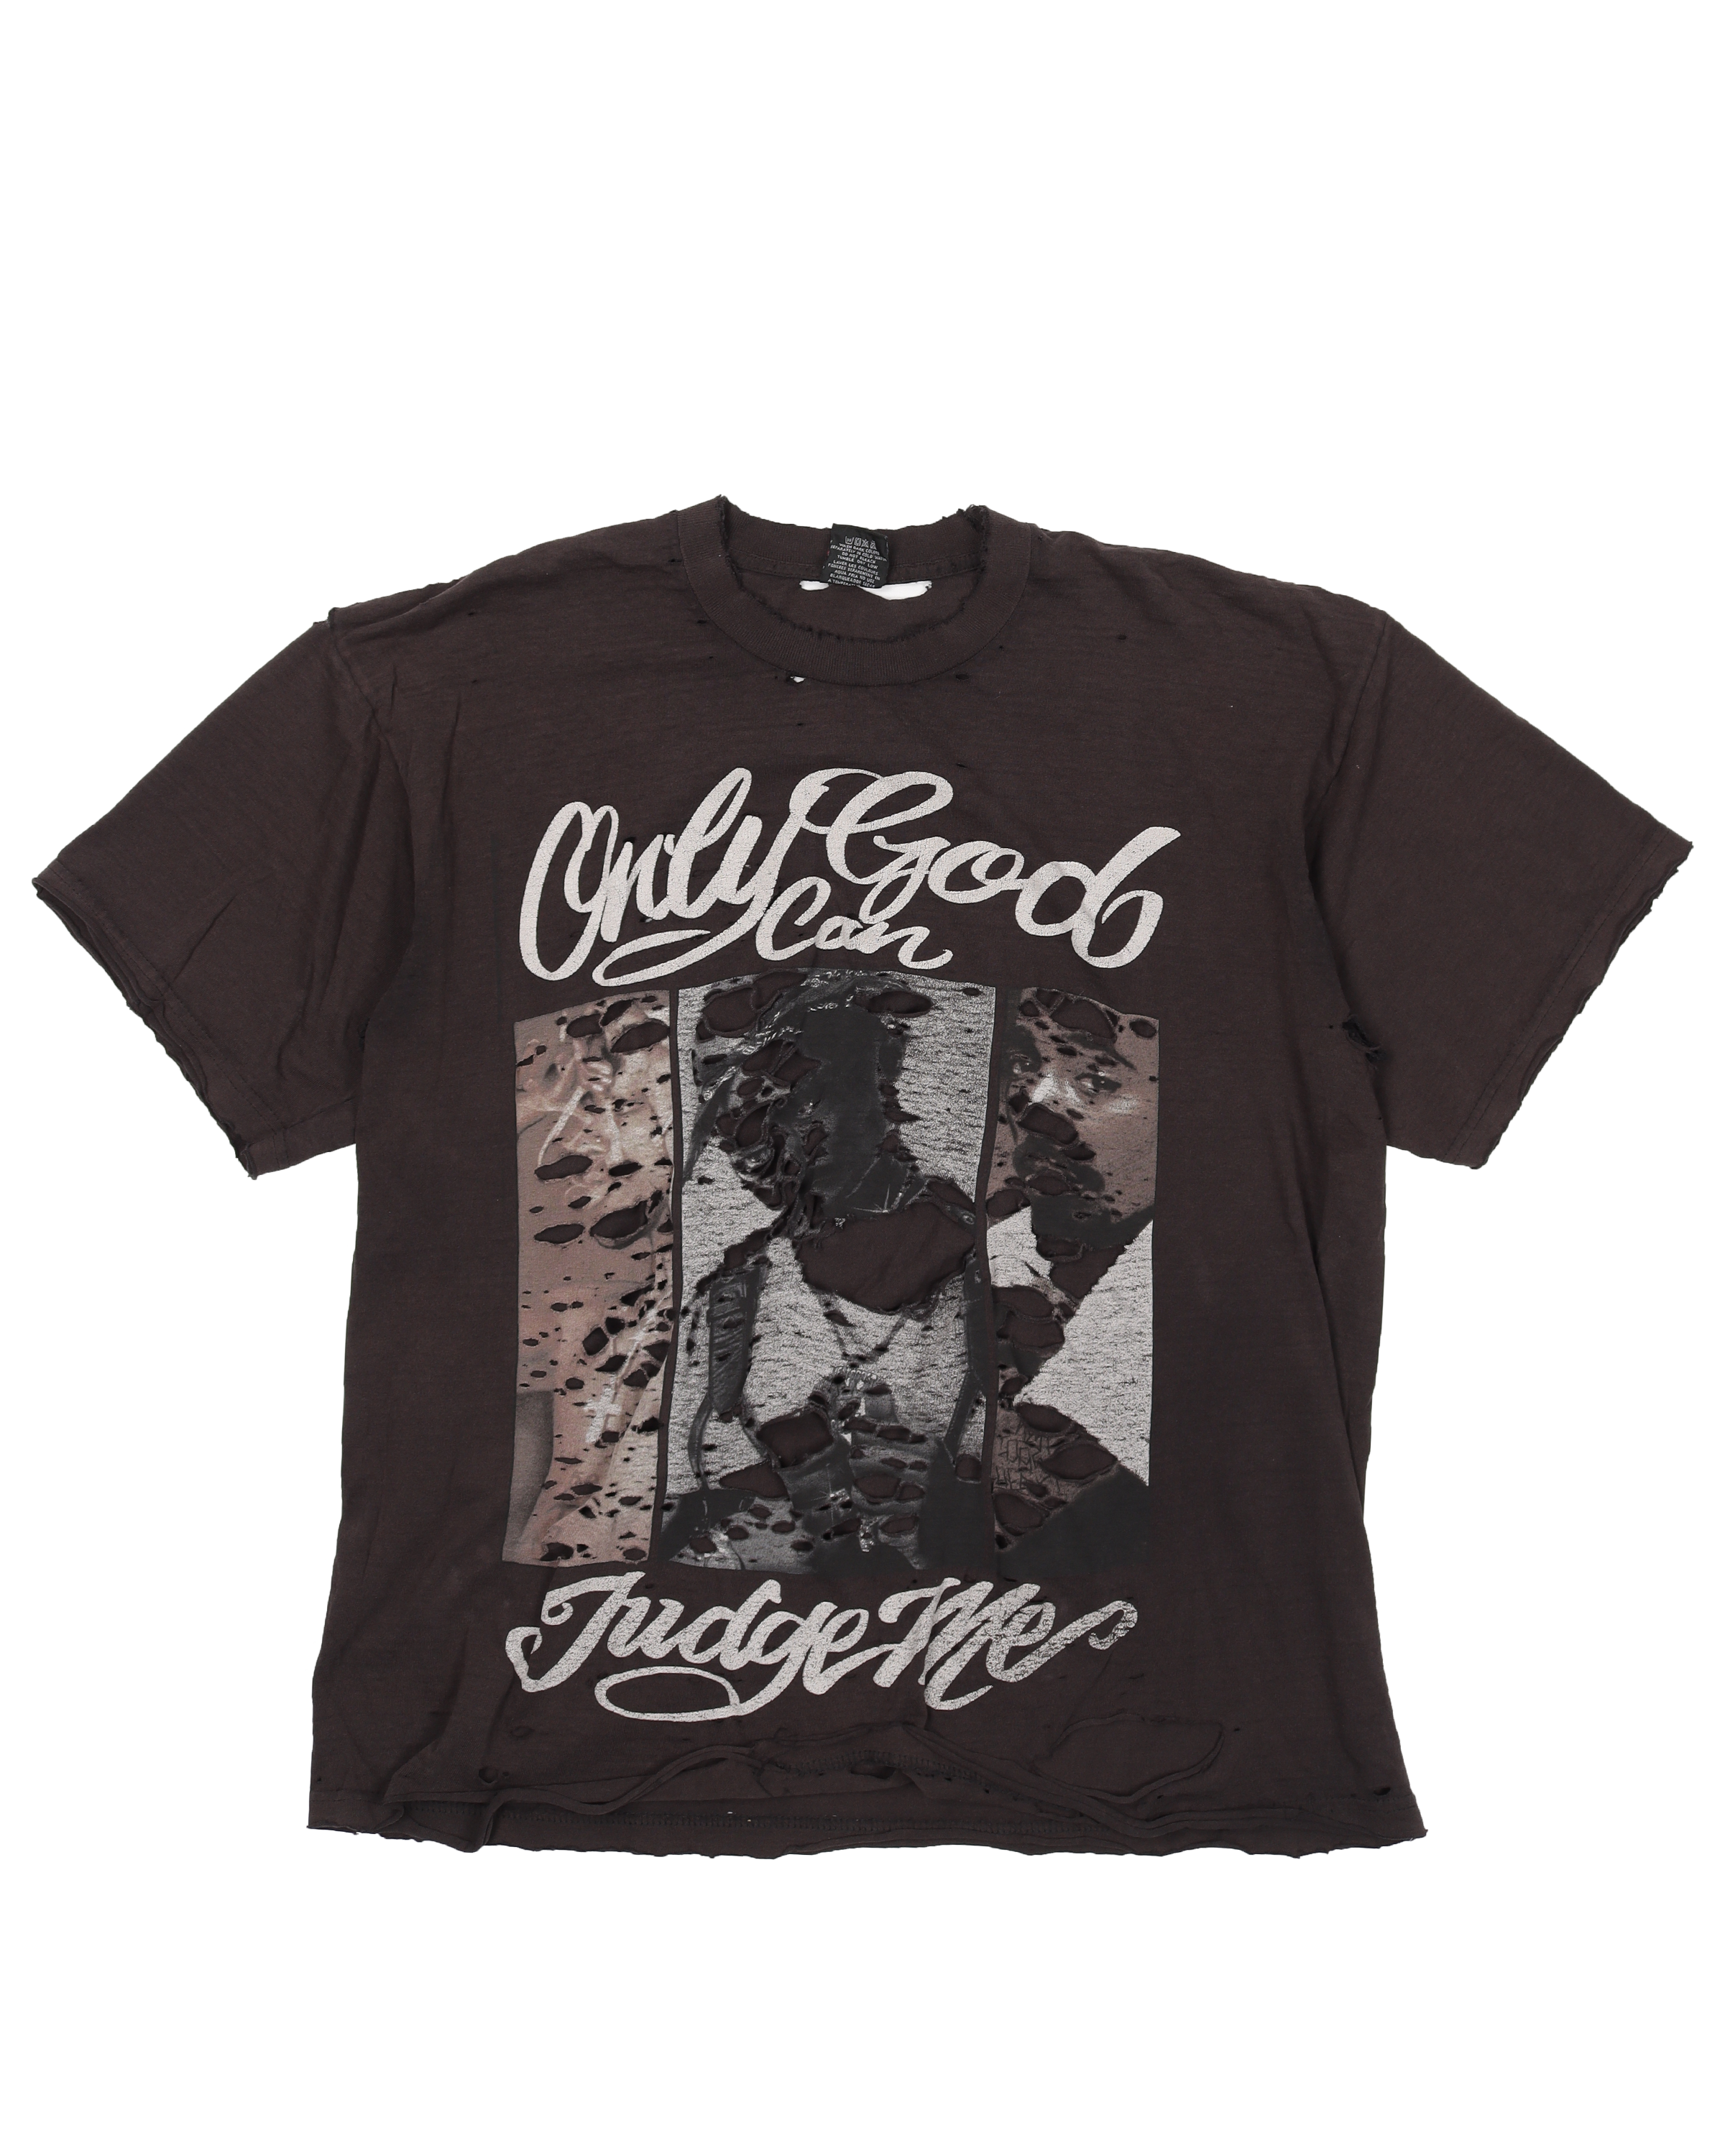 Tupac "Only God Can Judge Me" T-Shirt